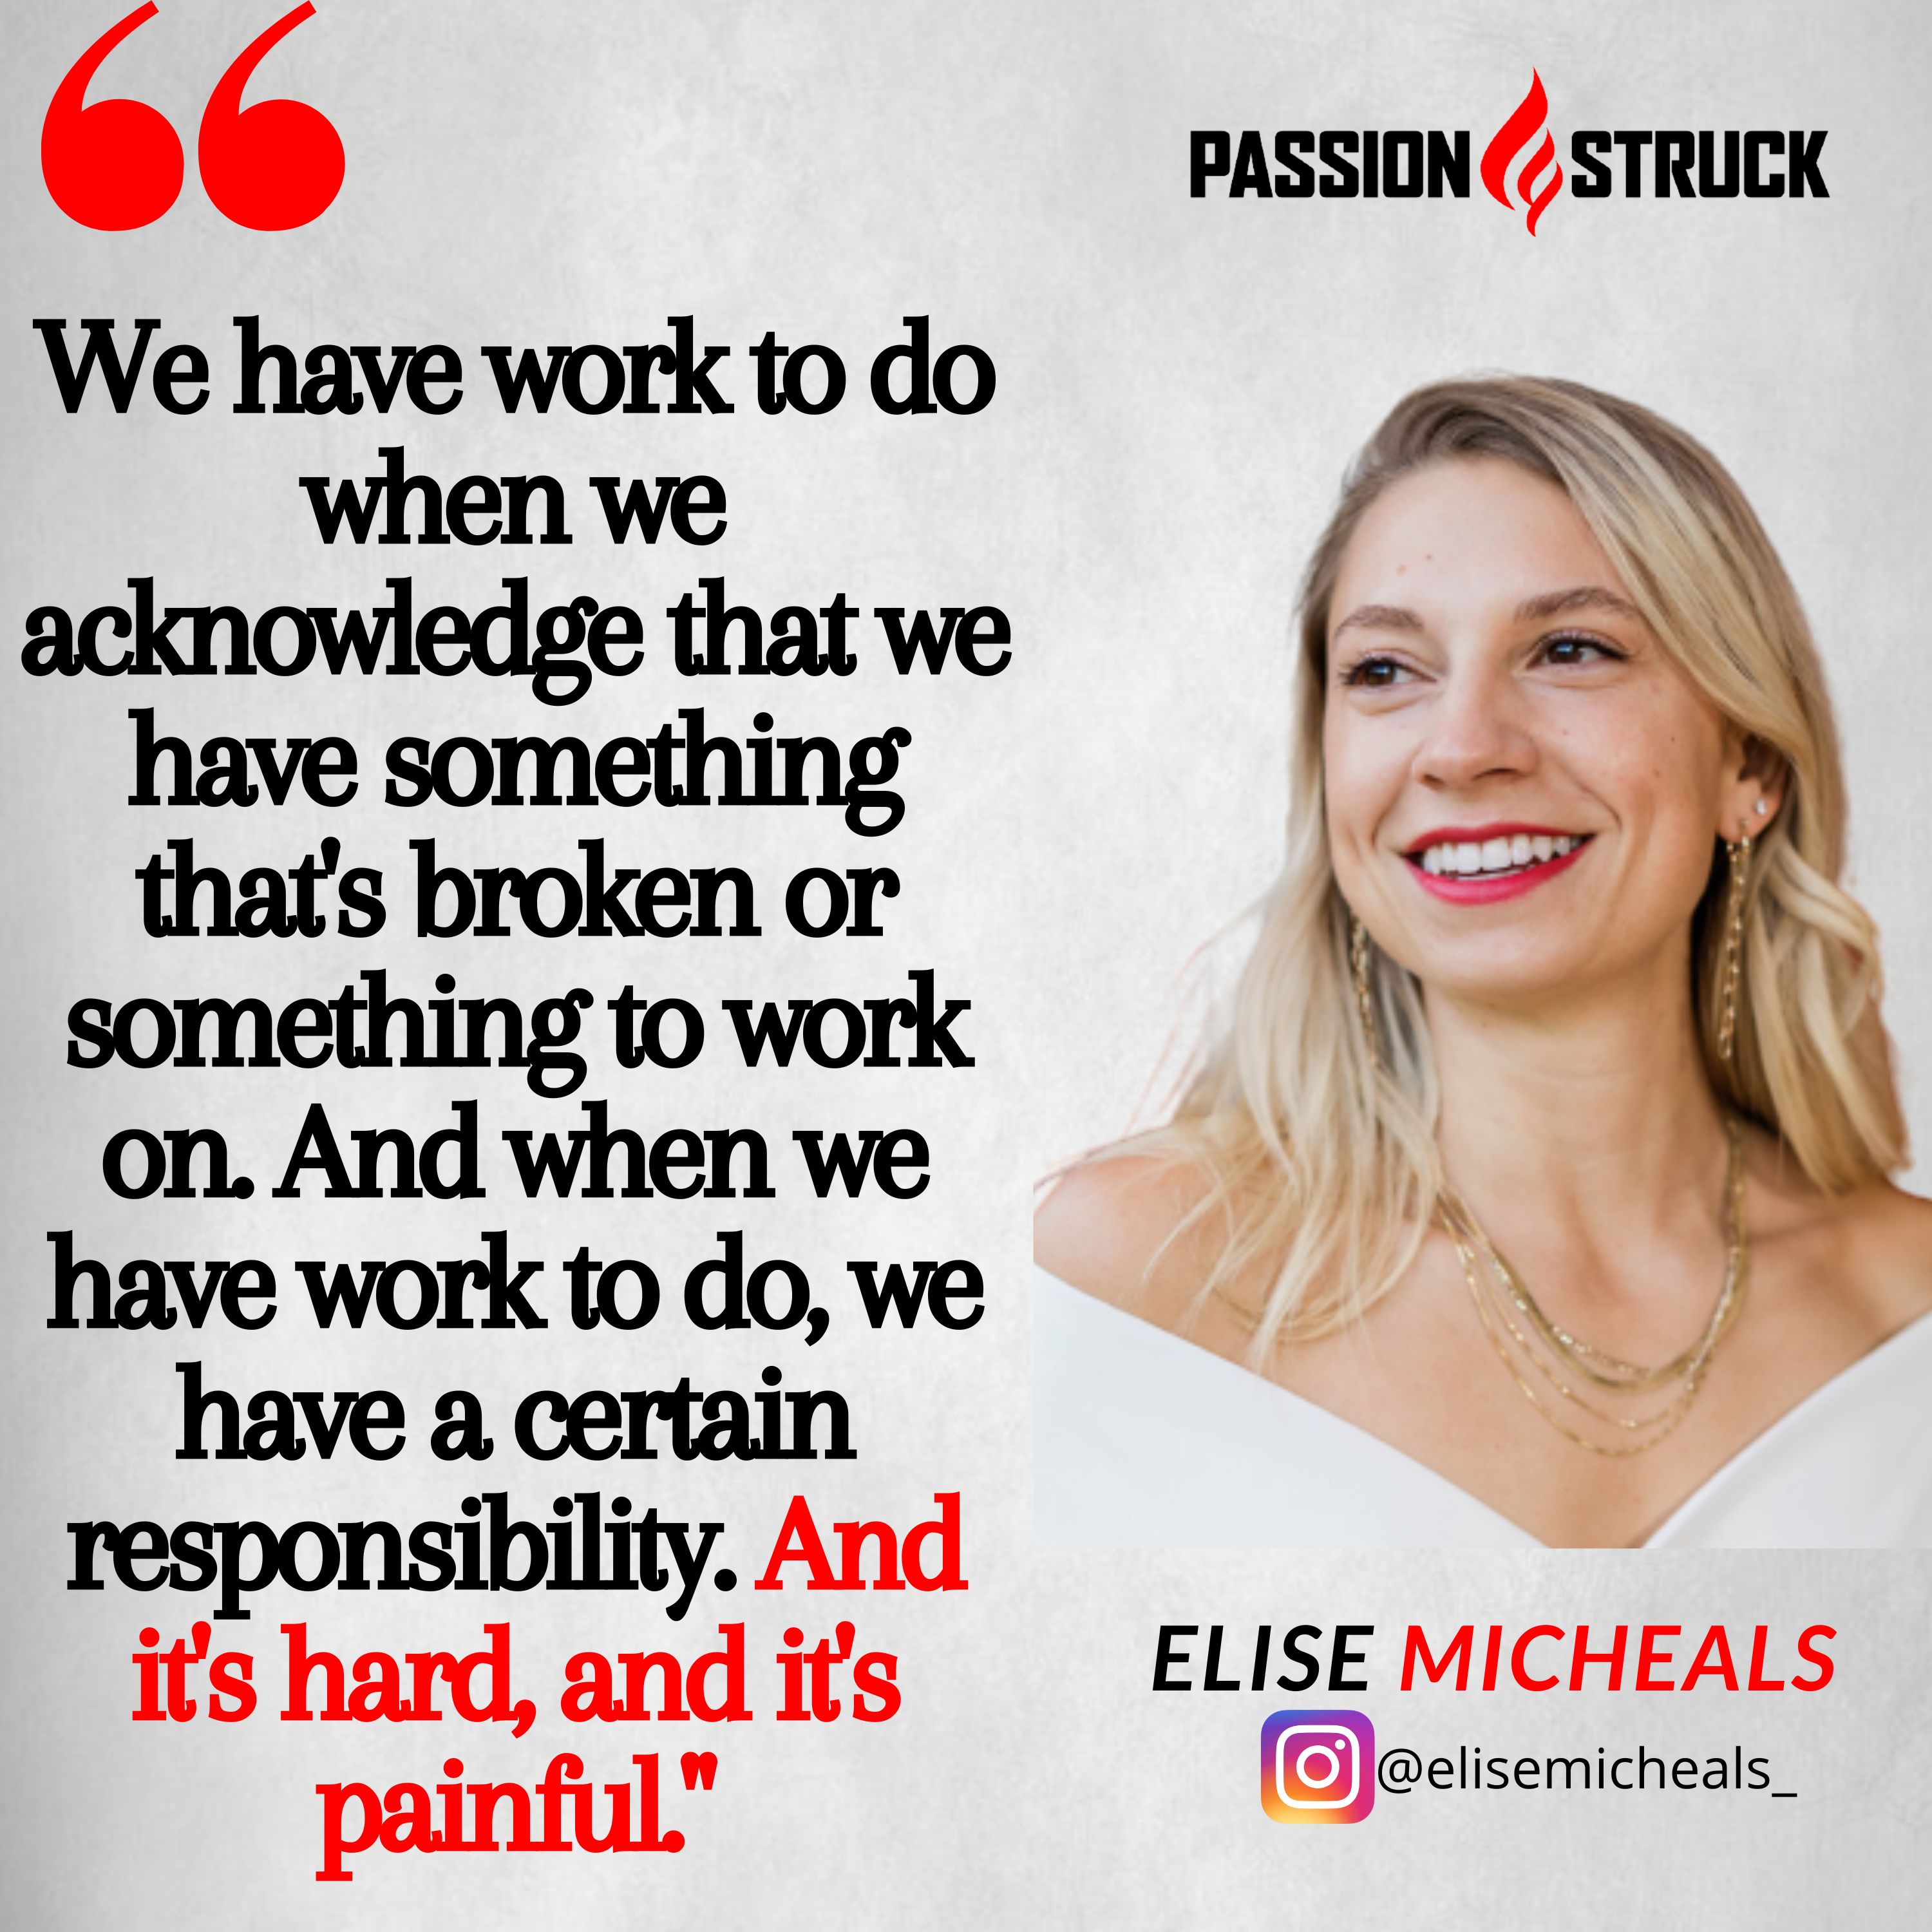 Quote by Elise Micheals from the Passion Struck podcast about overcoming trauma